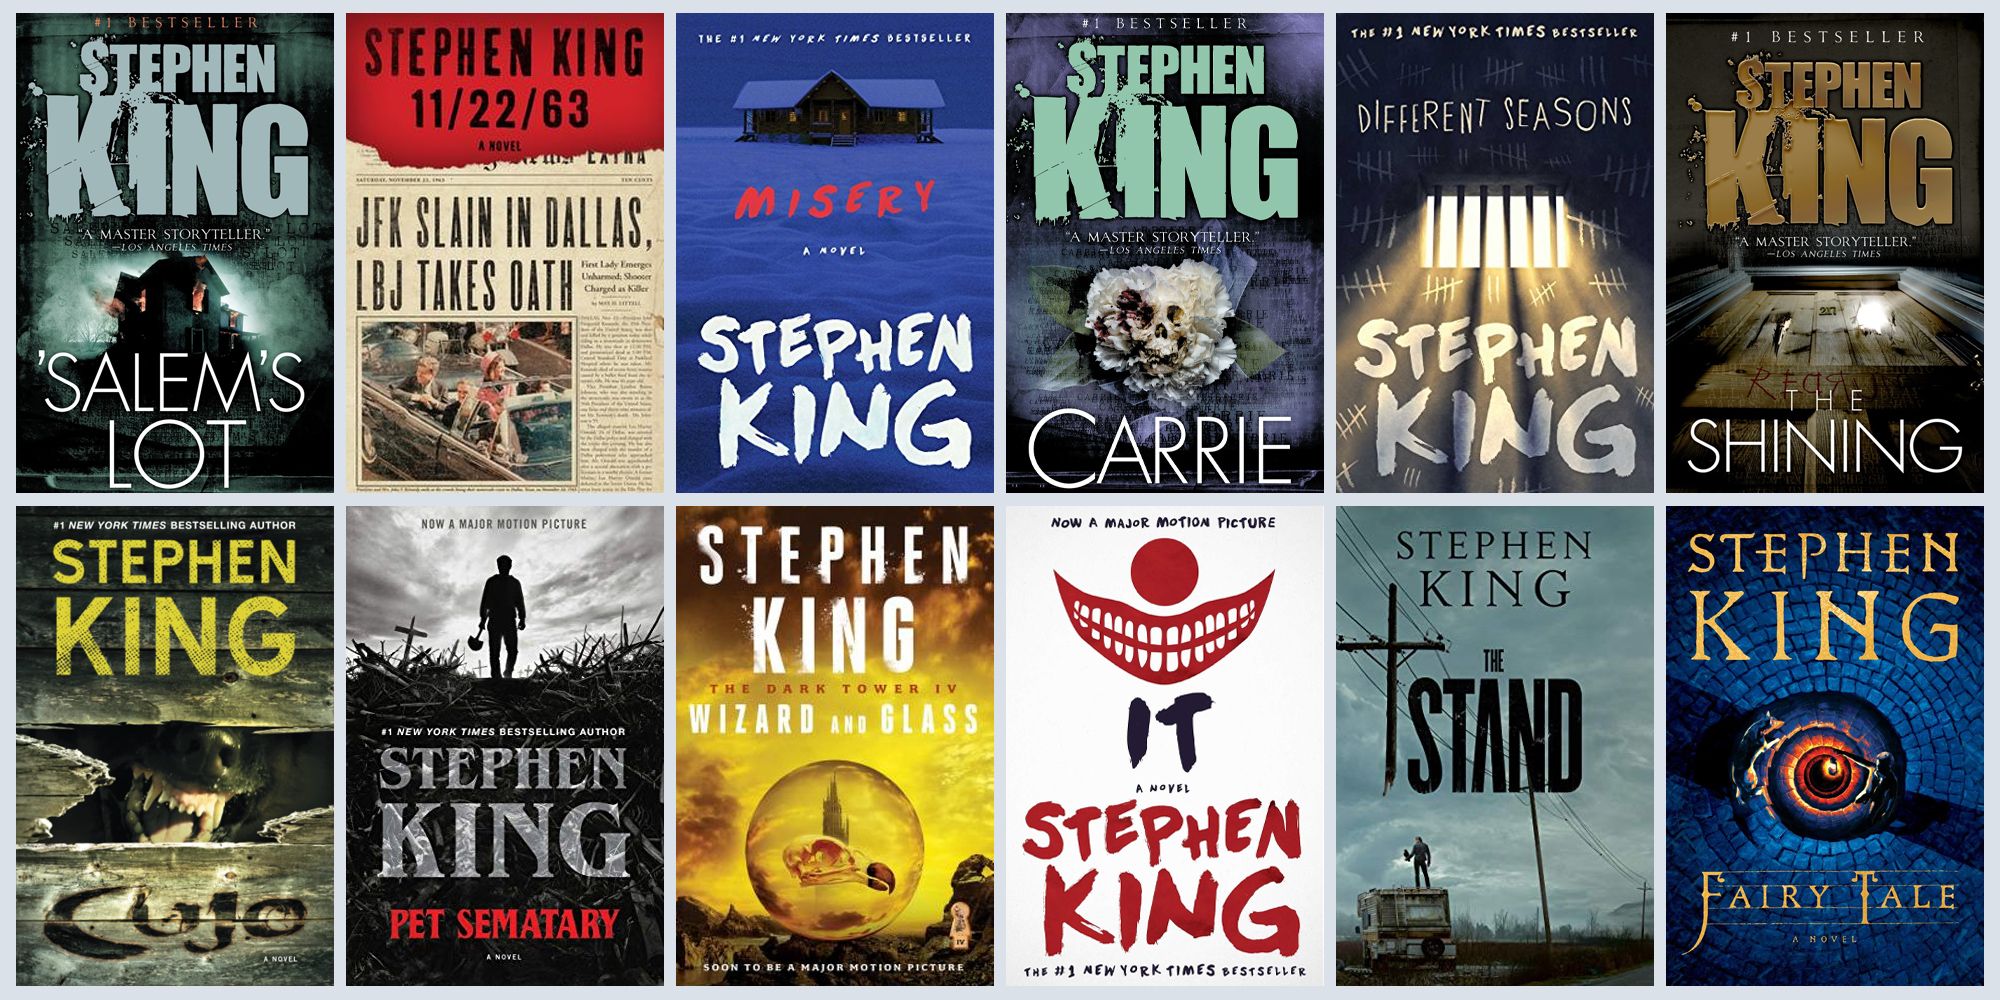 Stephen King Books: Your Gateway to a Haunting Literary World